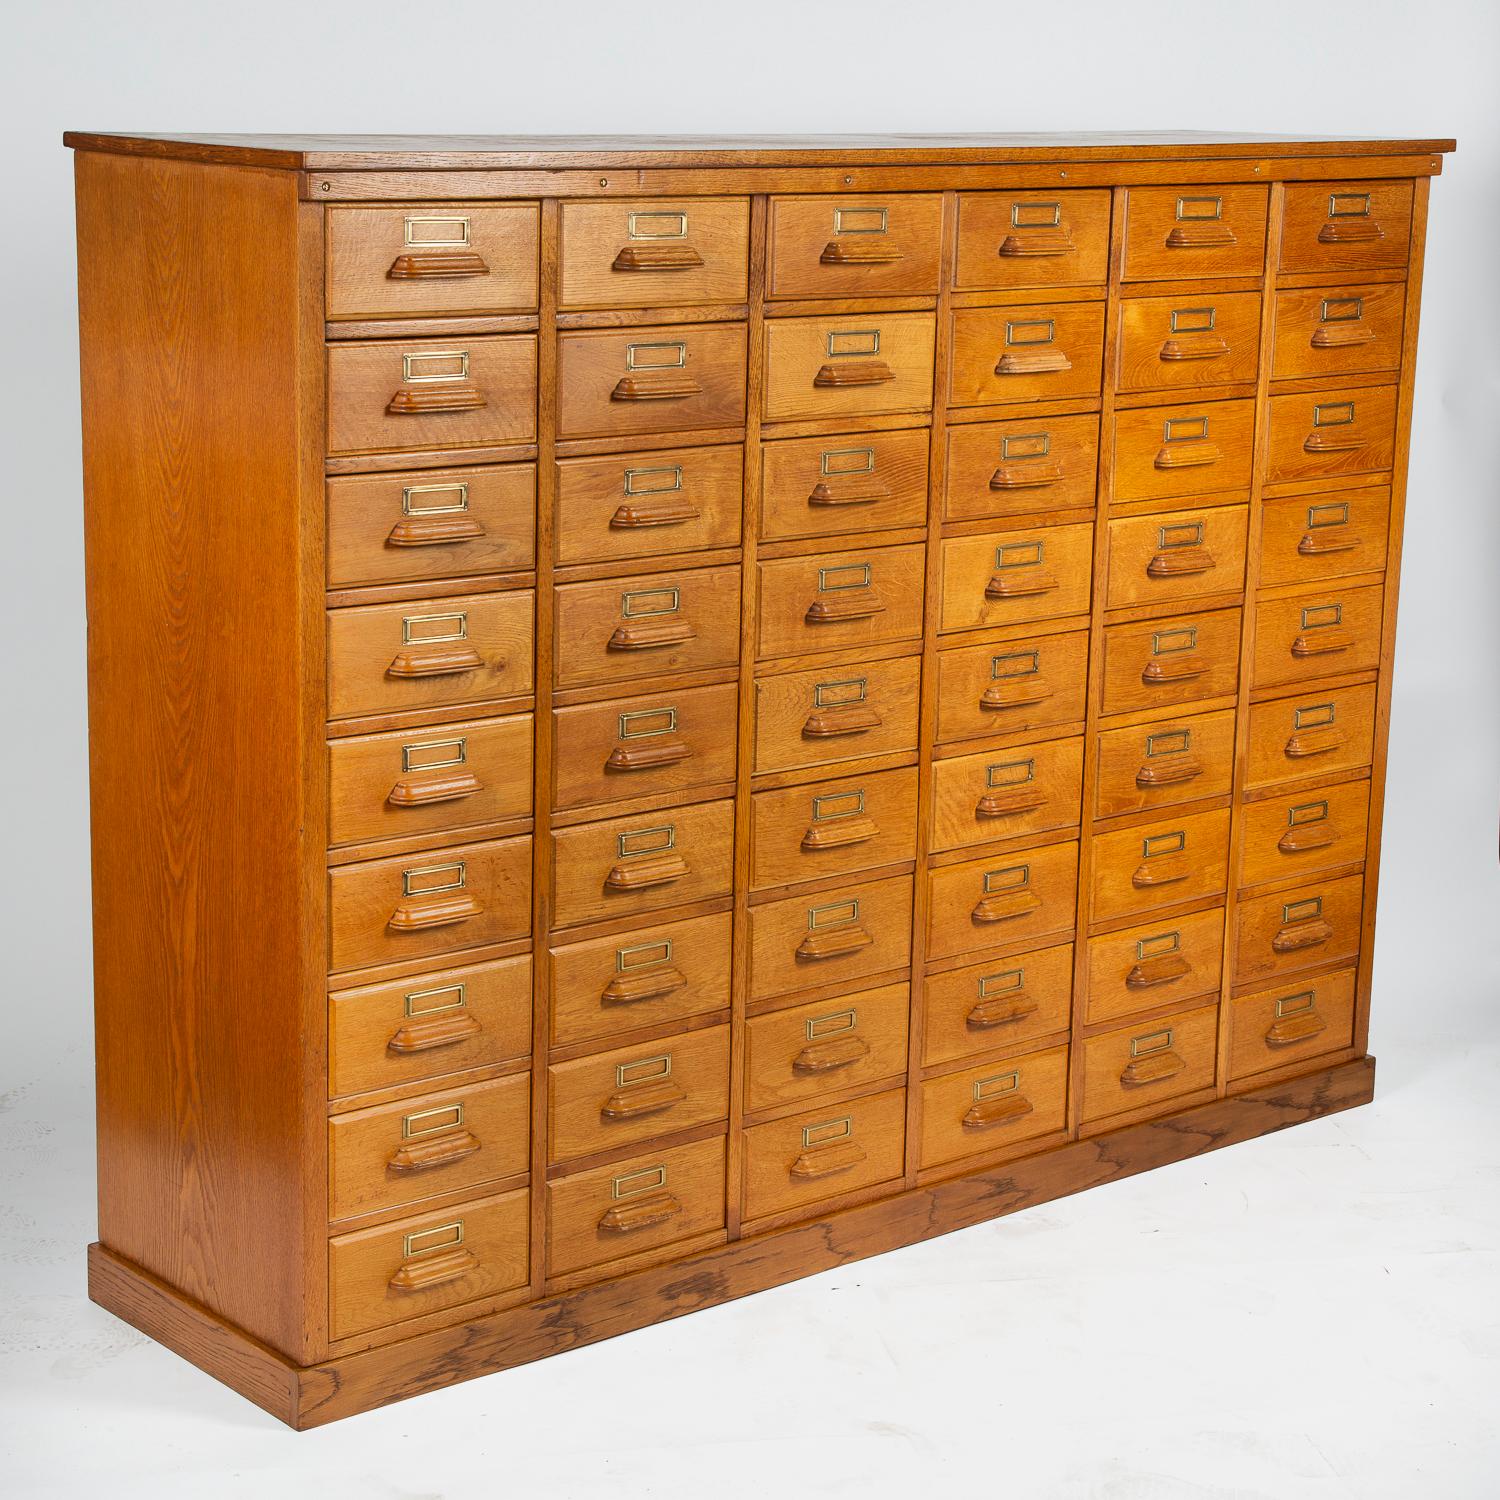 A golden oak haberdashery or shirt maker’s cabinet, with brass label holders. 

54 Drawers, each drawer has the right hand side cutaway for access.

Drawers comfortably fits US letter and A4 size paper, the internal dimension of each drawer is